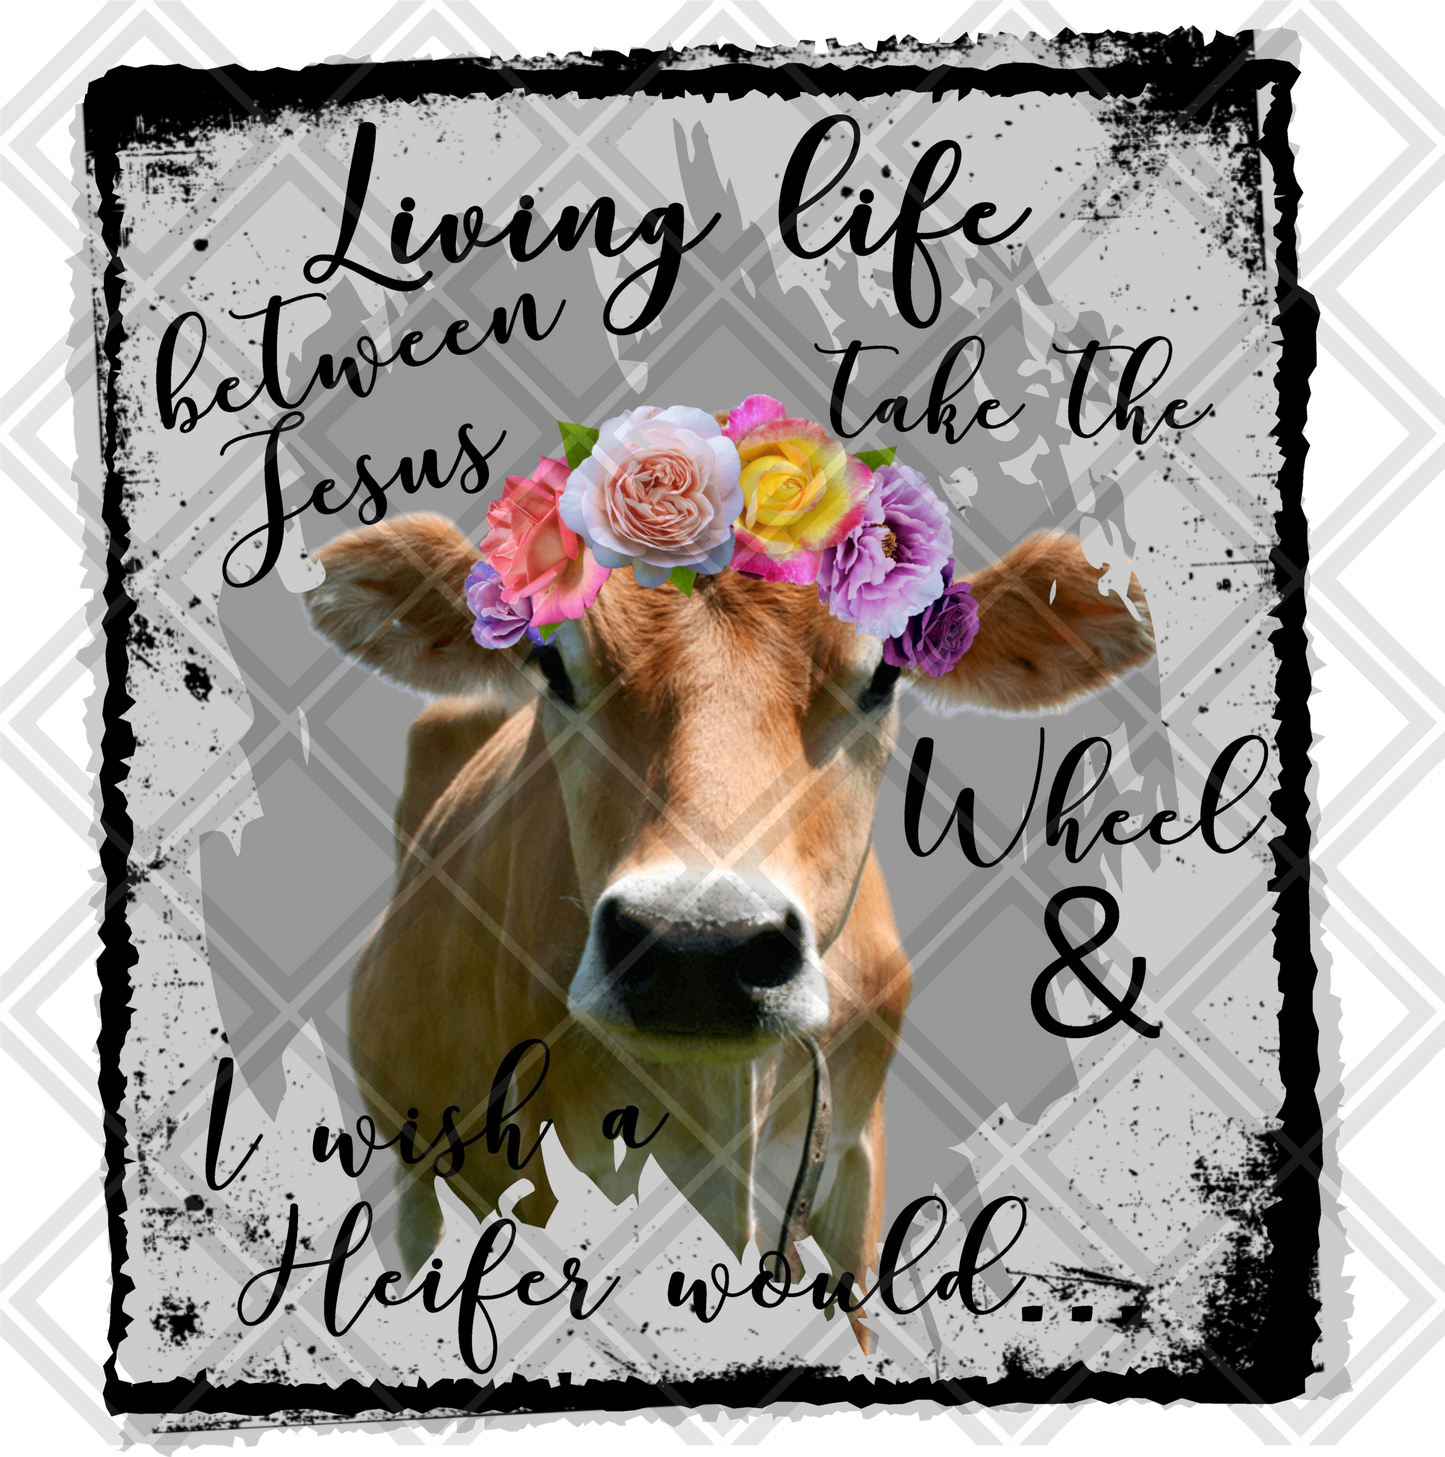 living somewhere between jesus take the wheel AND I WISH A HEIFER WOULD COW FLOWERS png Digital Download Instand Download